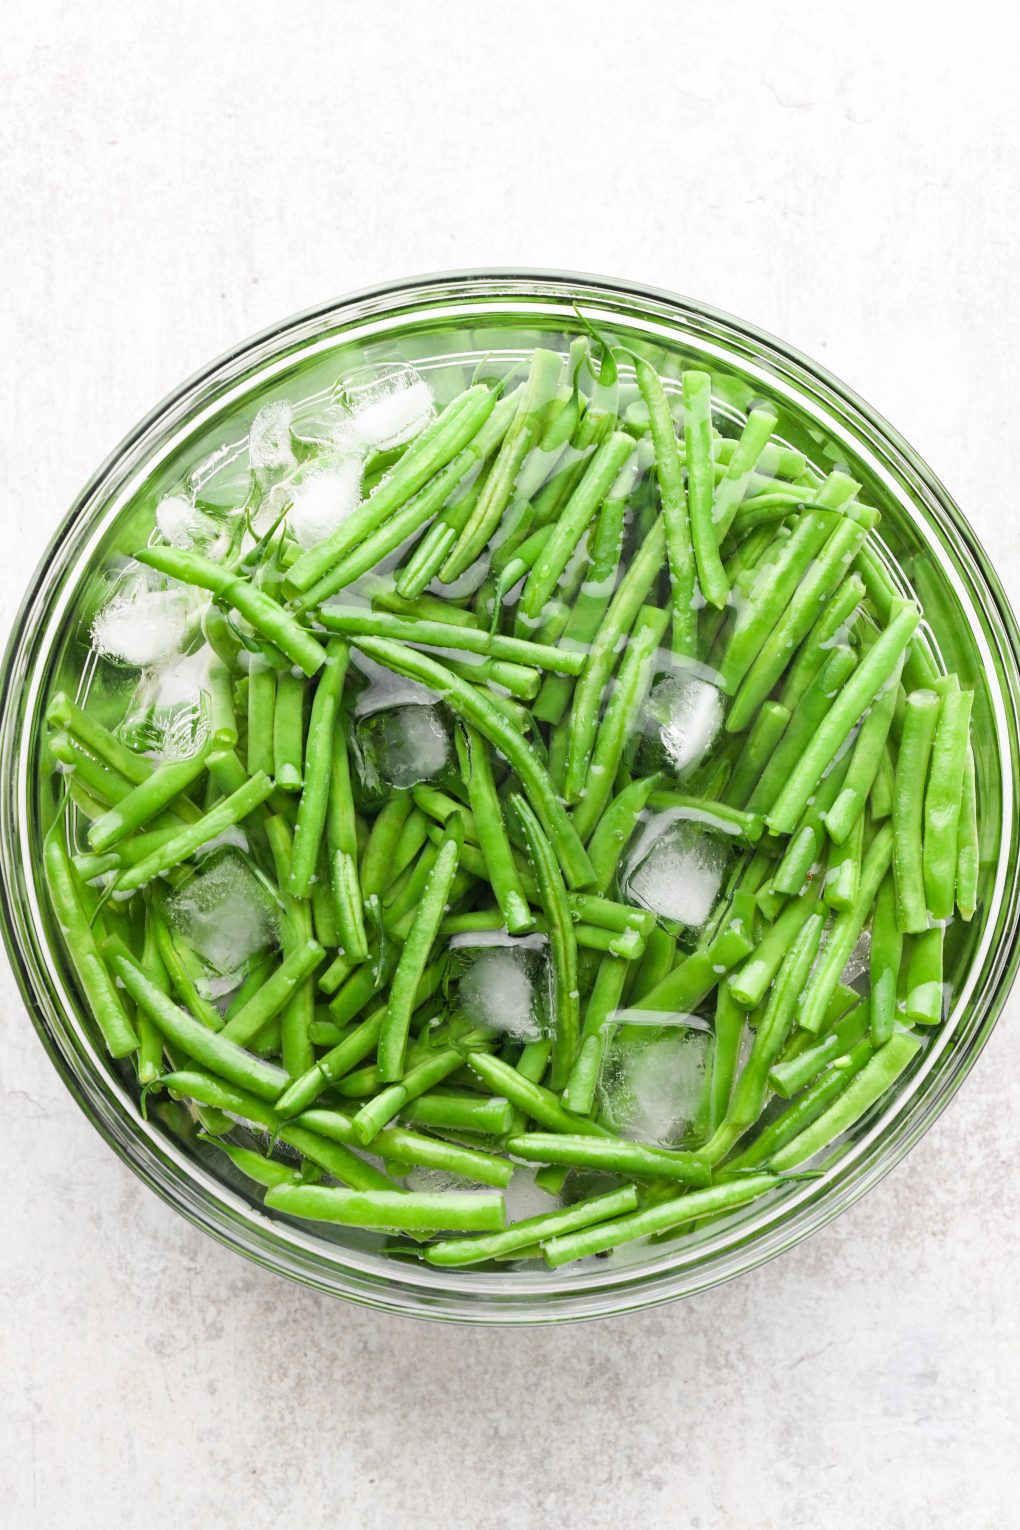 Blanched green beans in a bowl of ice water.